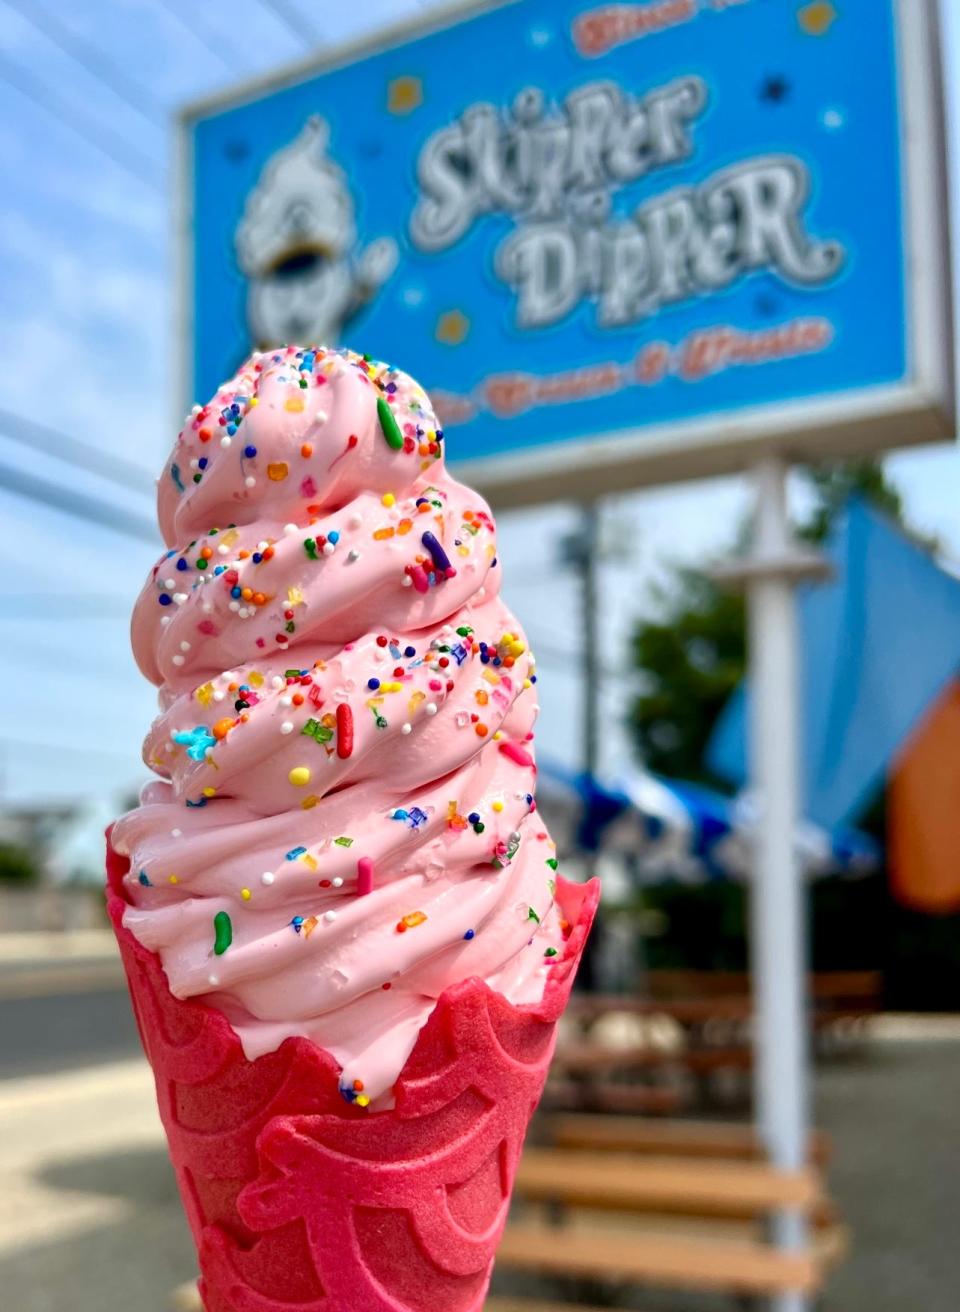 Bubblegum soft ice cream from Skipper Dipper in Long Beach, served in a pink vanilla cone from the famous Konery in Brooklyn.